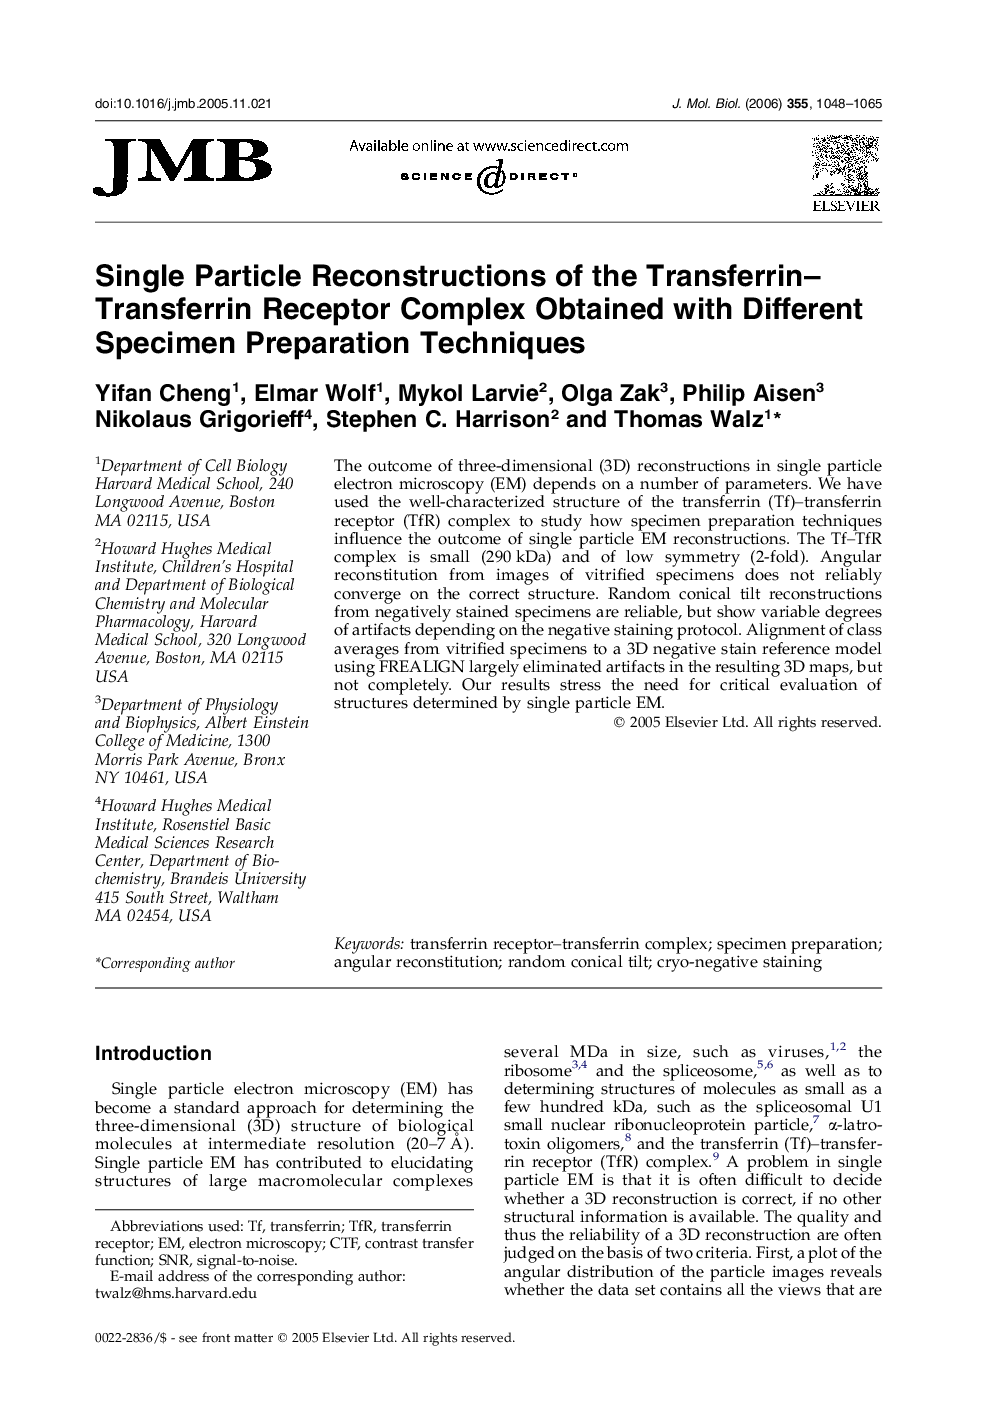 Single Particle Reconstructions of the Transferrin–Transferrin Receptor Complex Obtained with Different Specimen Preparation Techniques